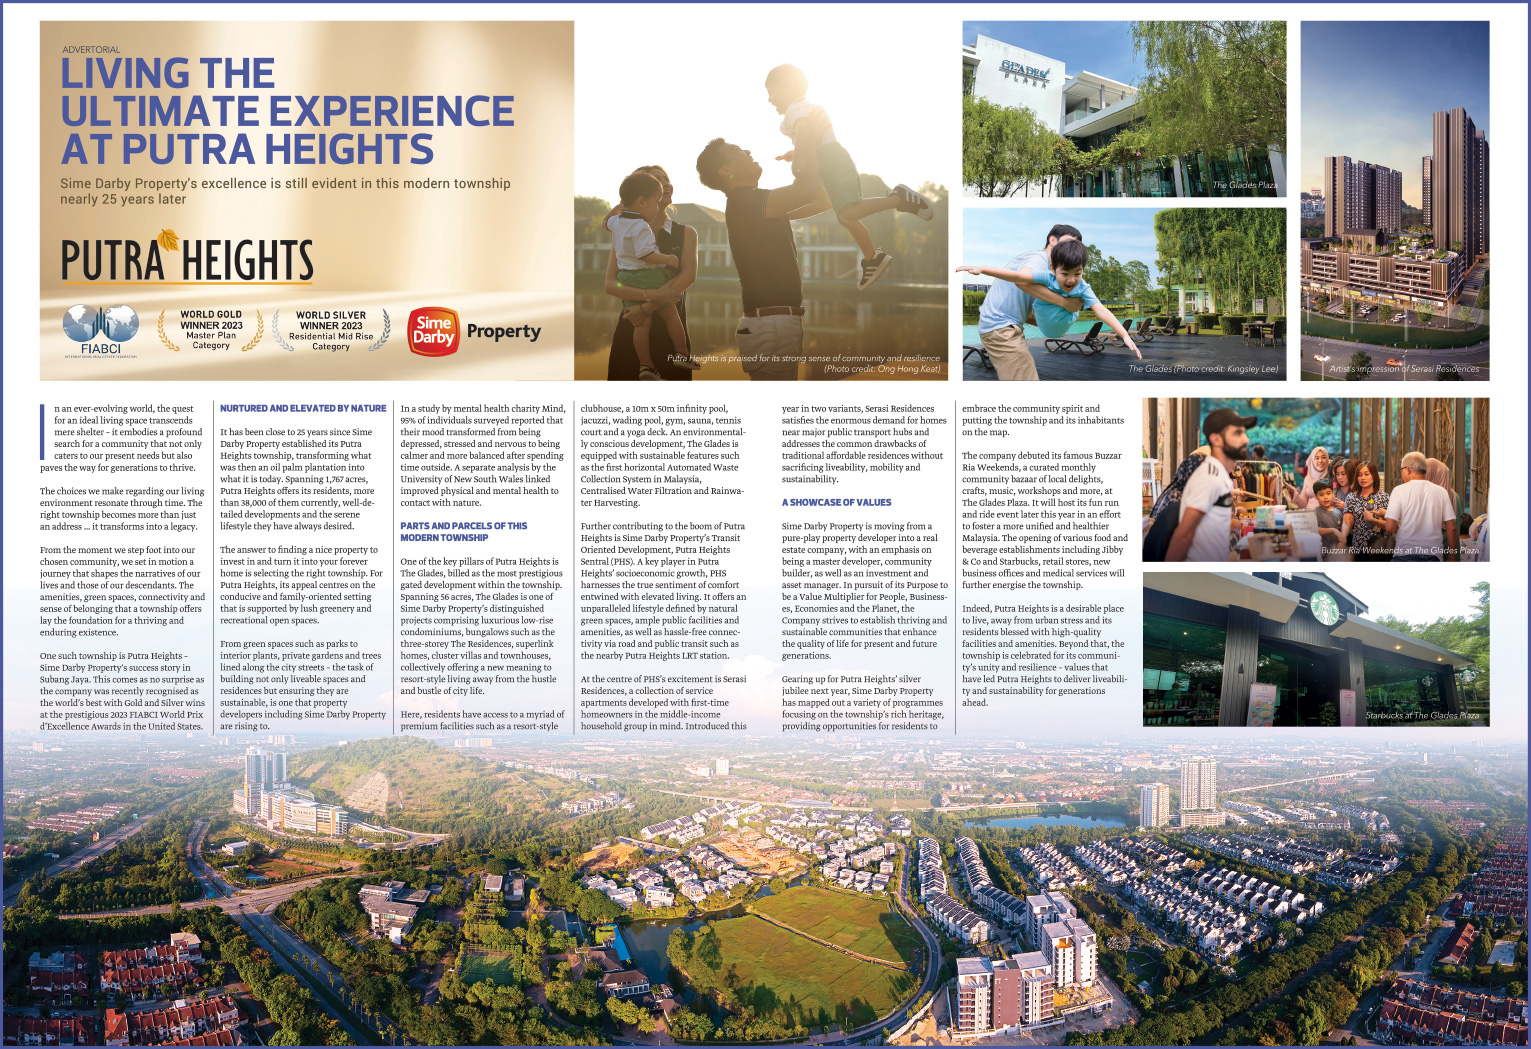 Living the Ultimate Experience at Putra Heights